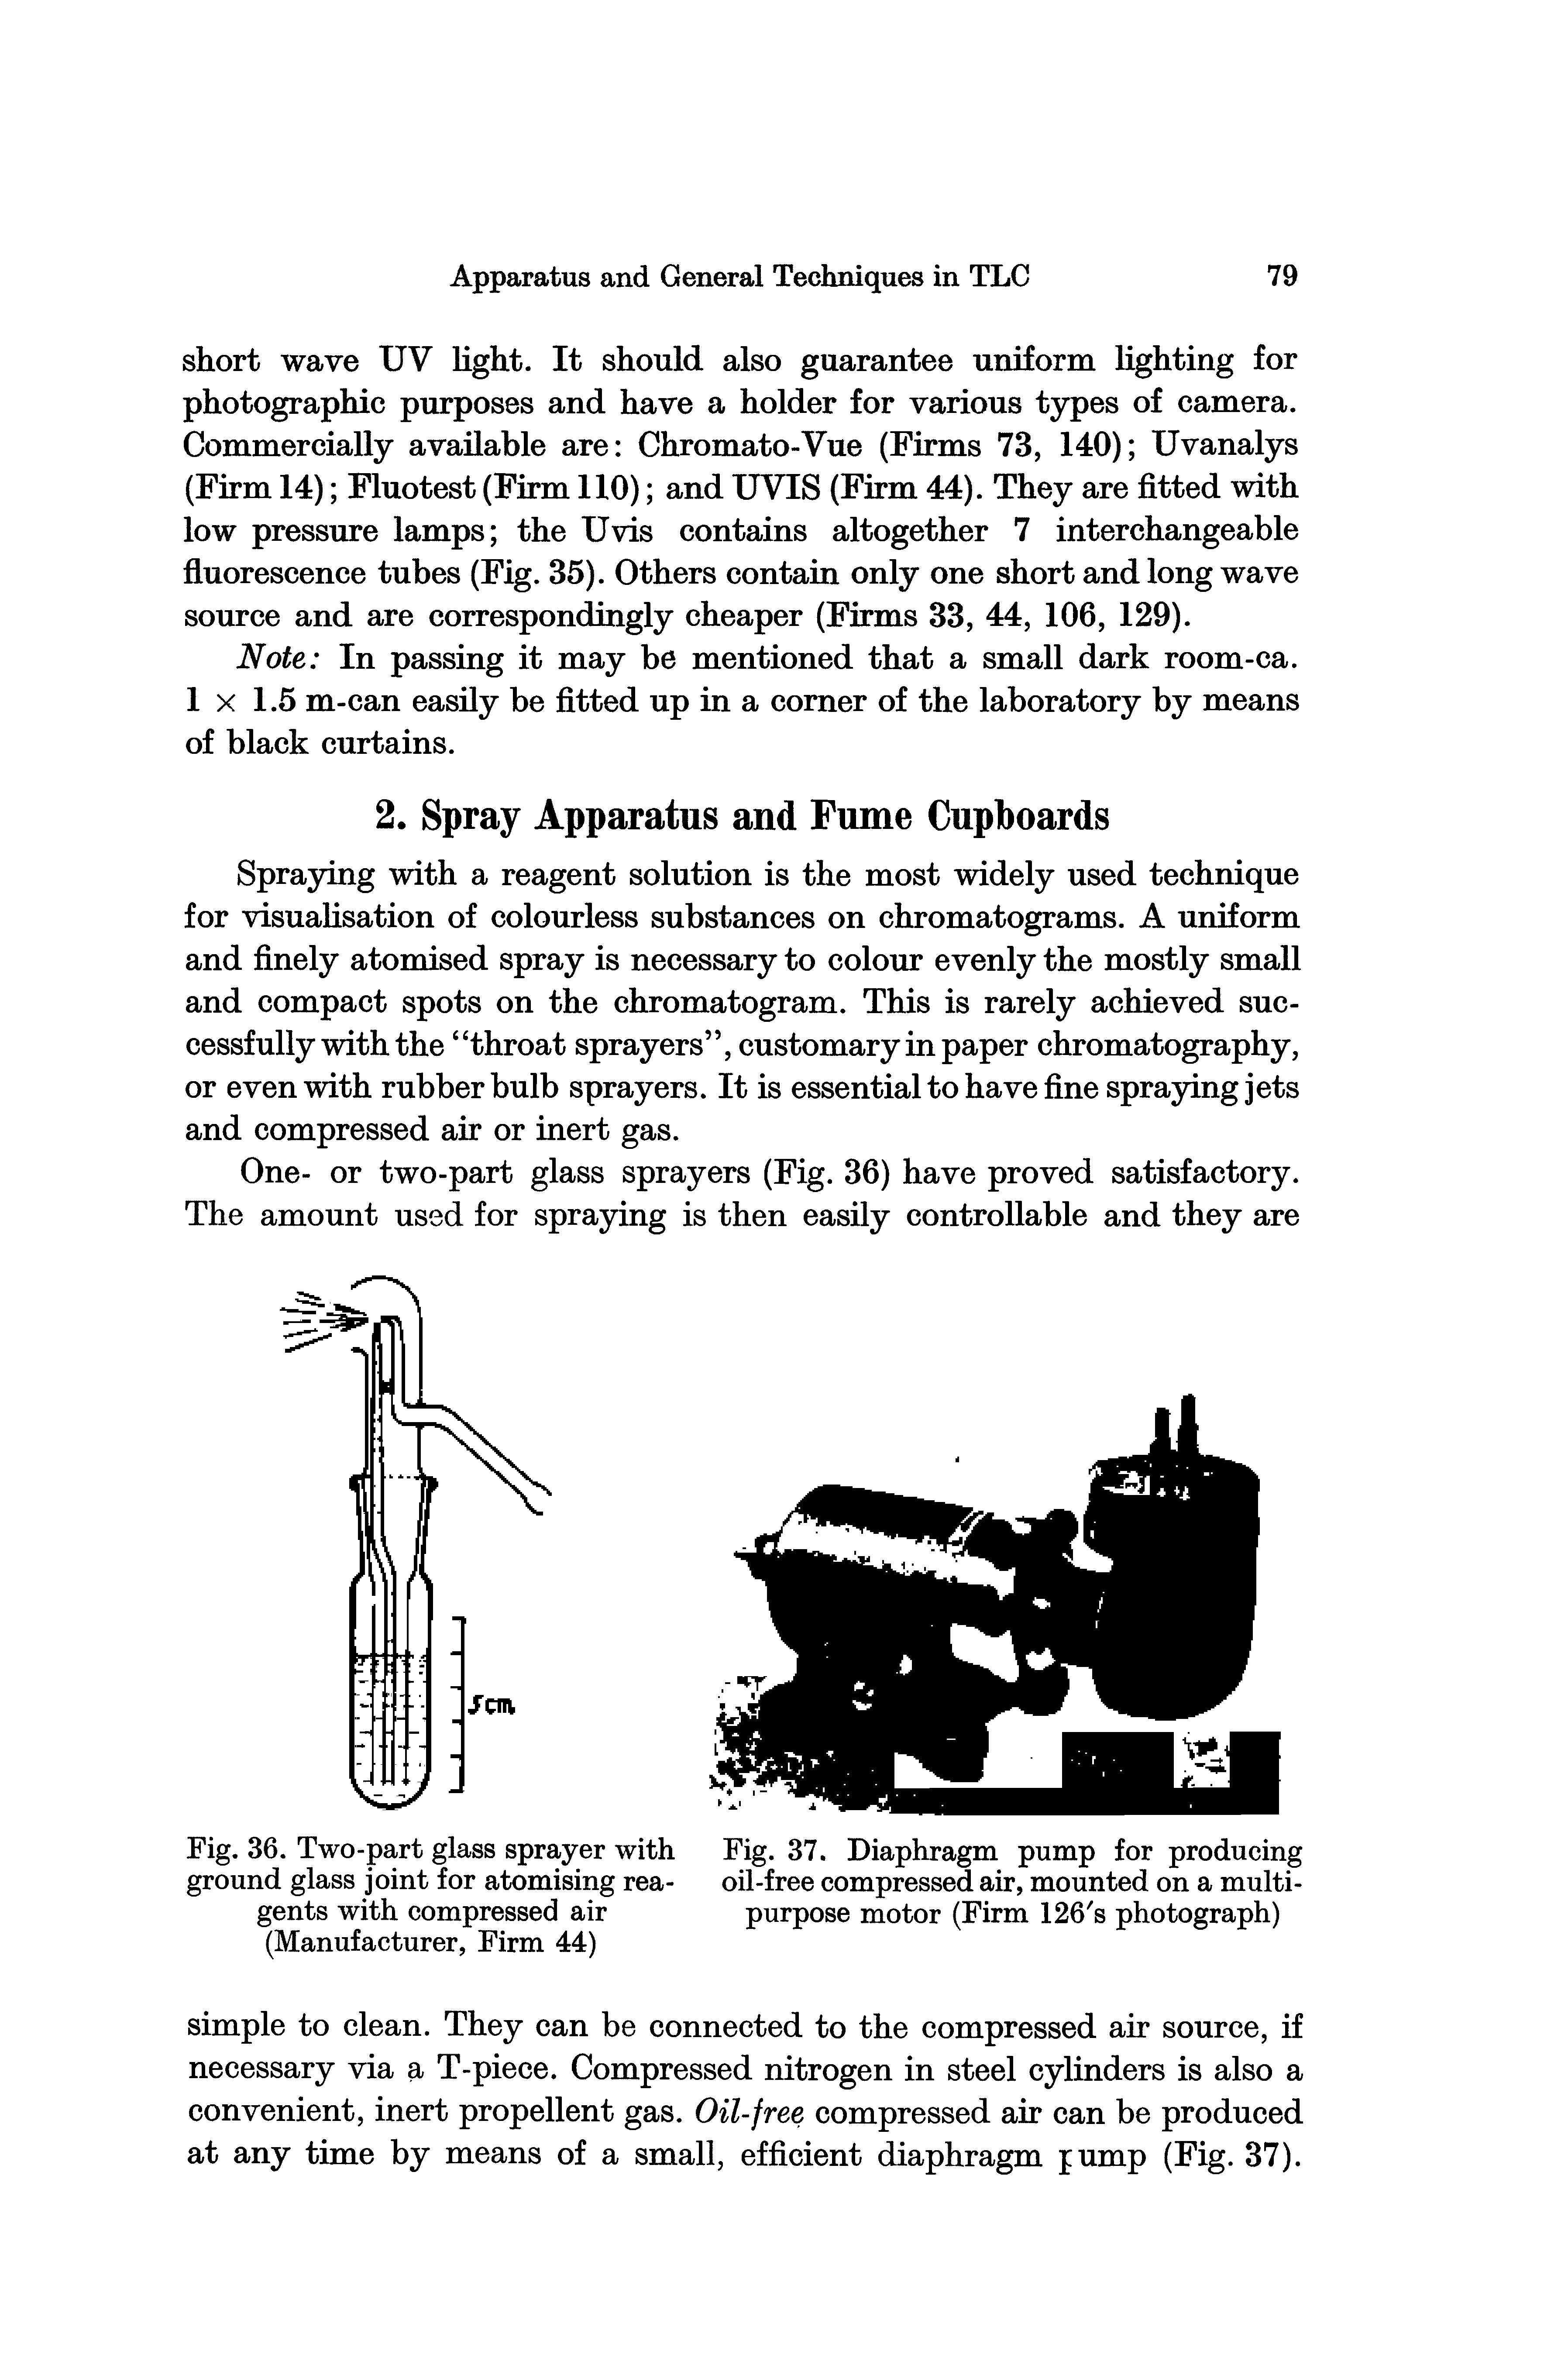 Fig. 36. Two-part glass sprayer with ground glass joint for atomising reagents with compressed air (Manufacturer, Firm 44)...